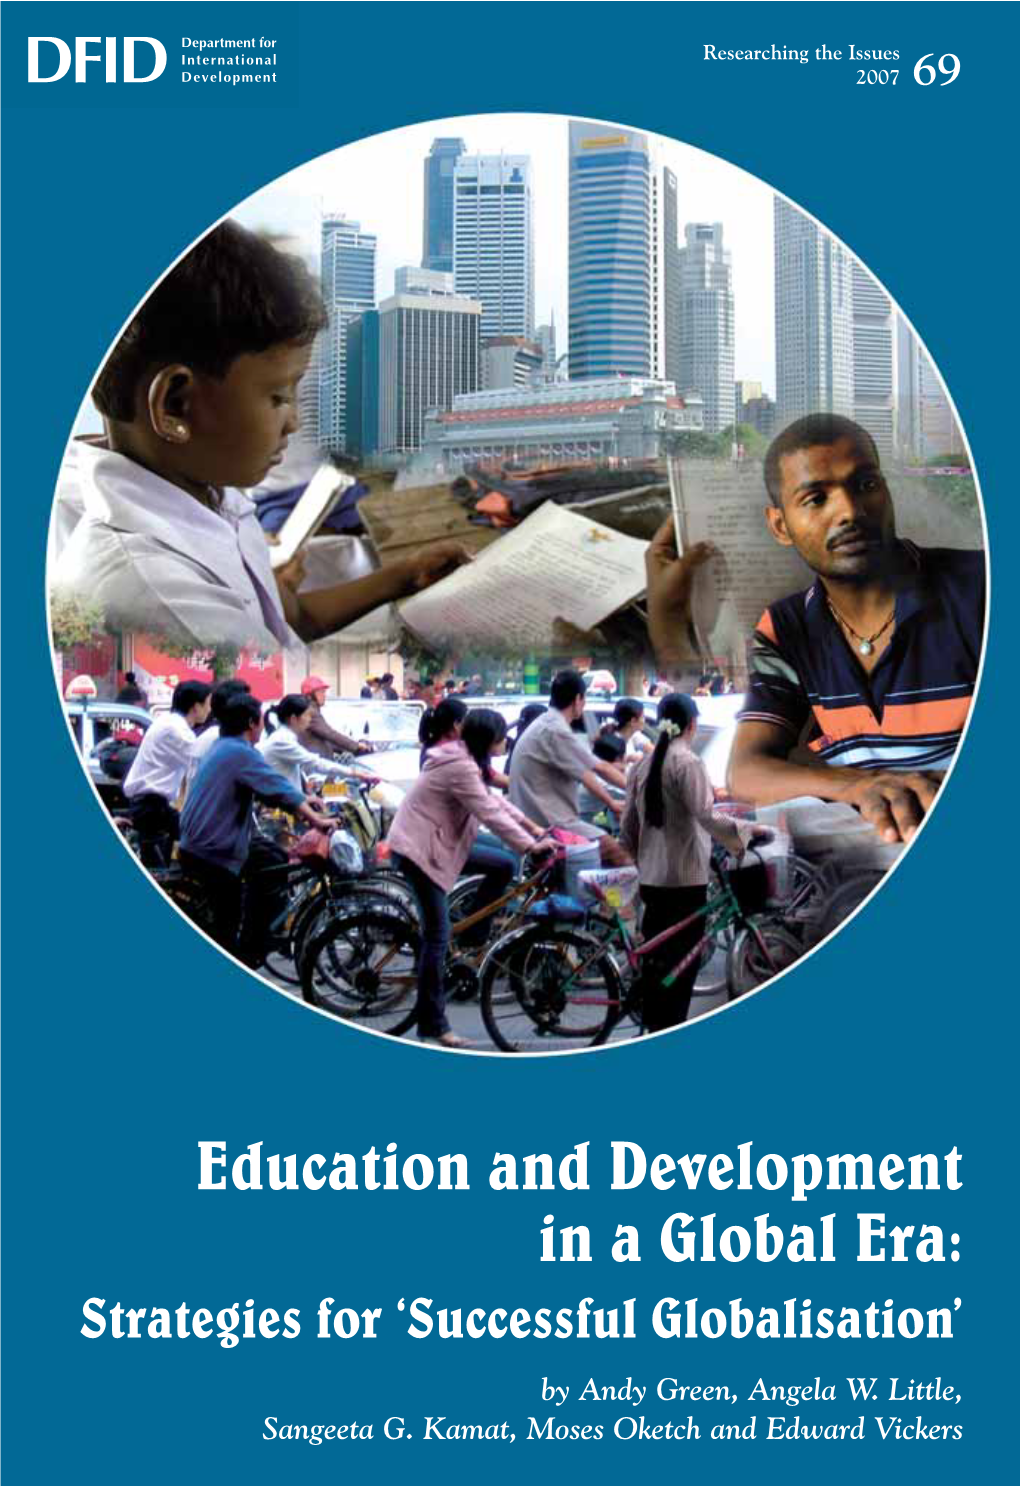 Education and Development in a Global Era: Strategies for ‘Successful Globalisation’ by Andy Green, Angela W